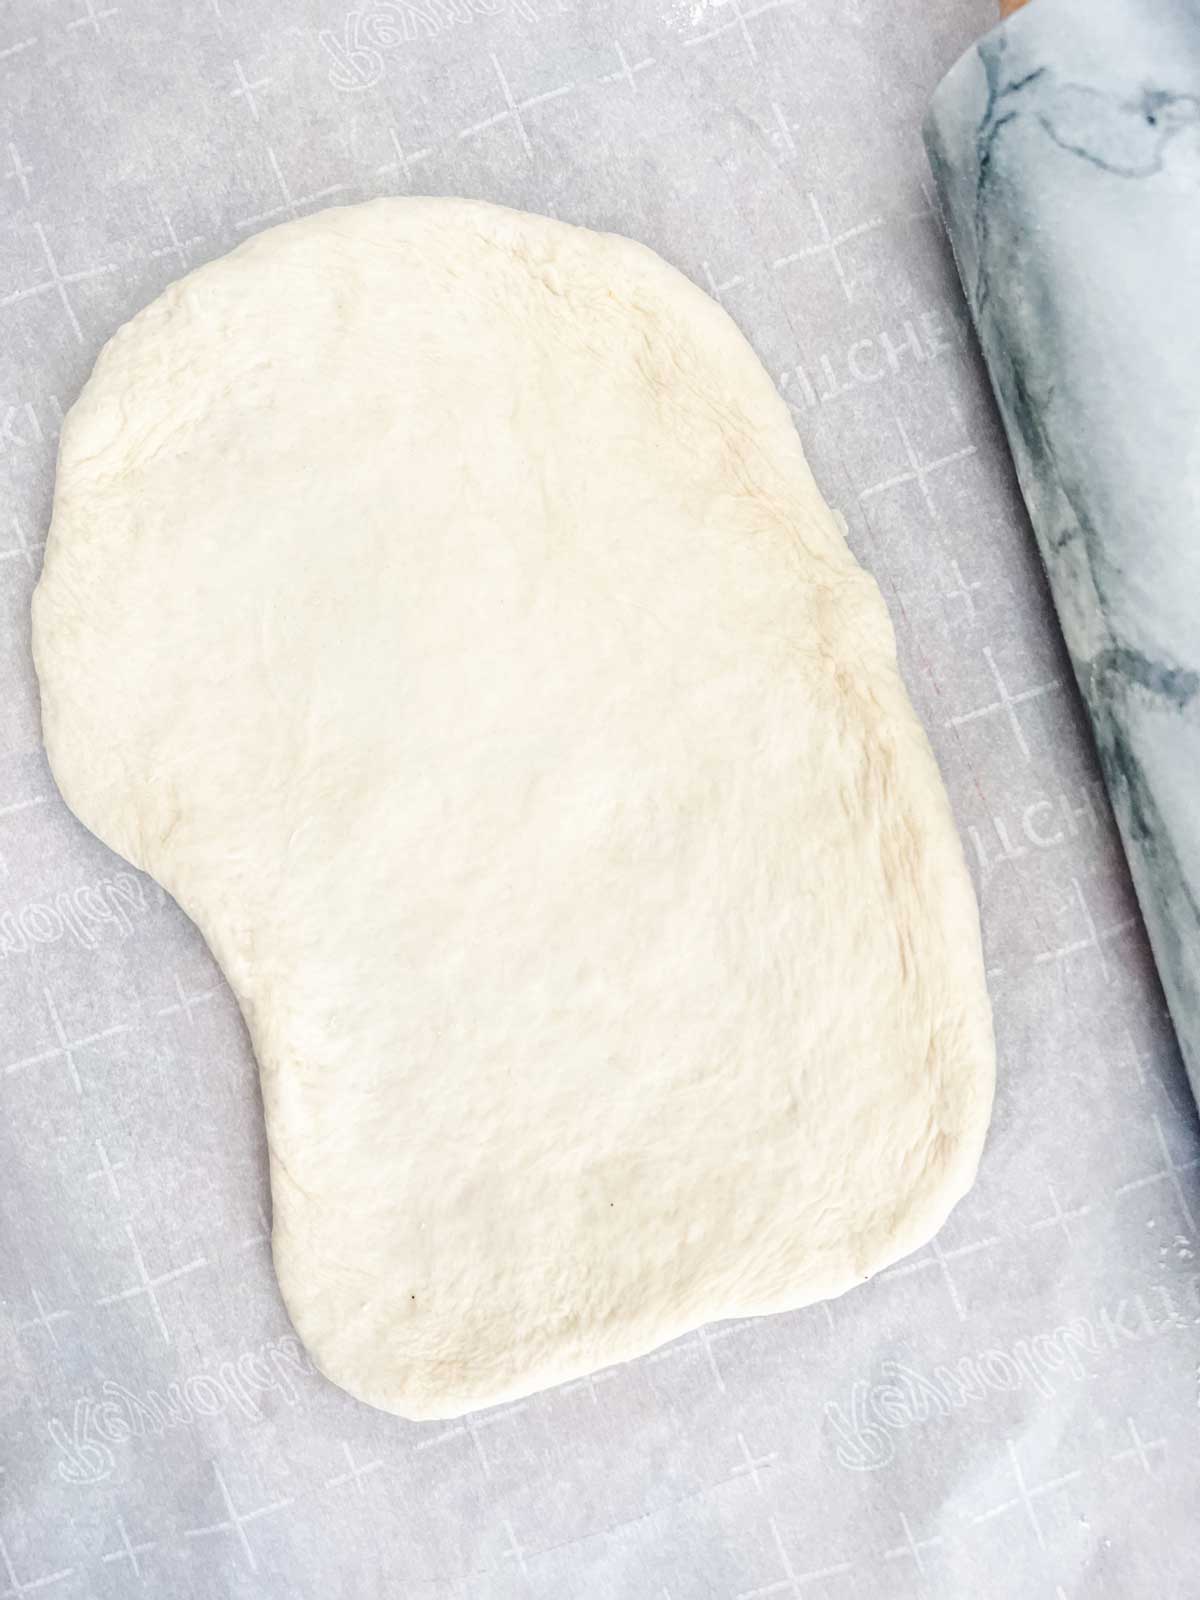 Rustic shaped pizza dough that has been rolled out.